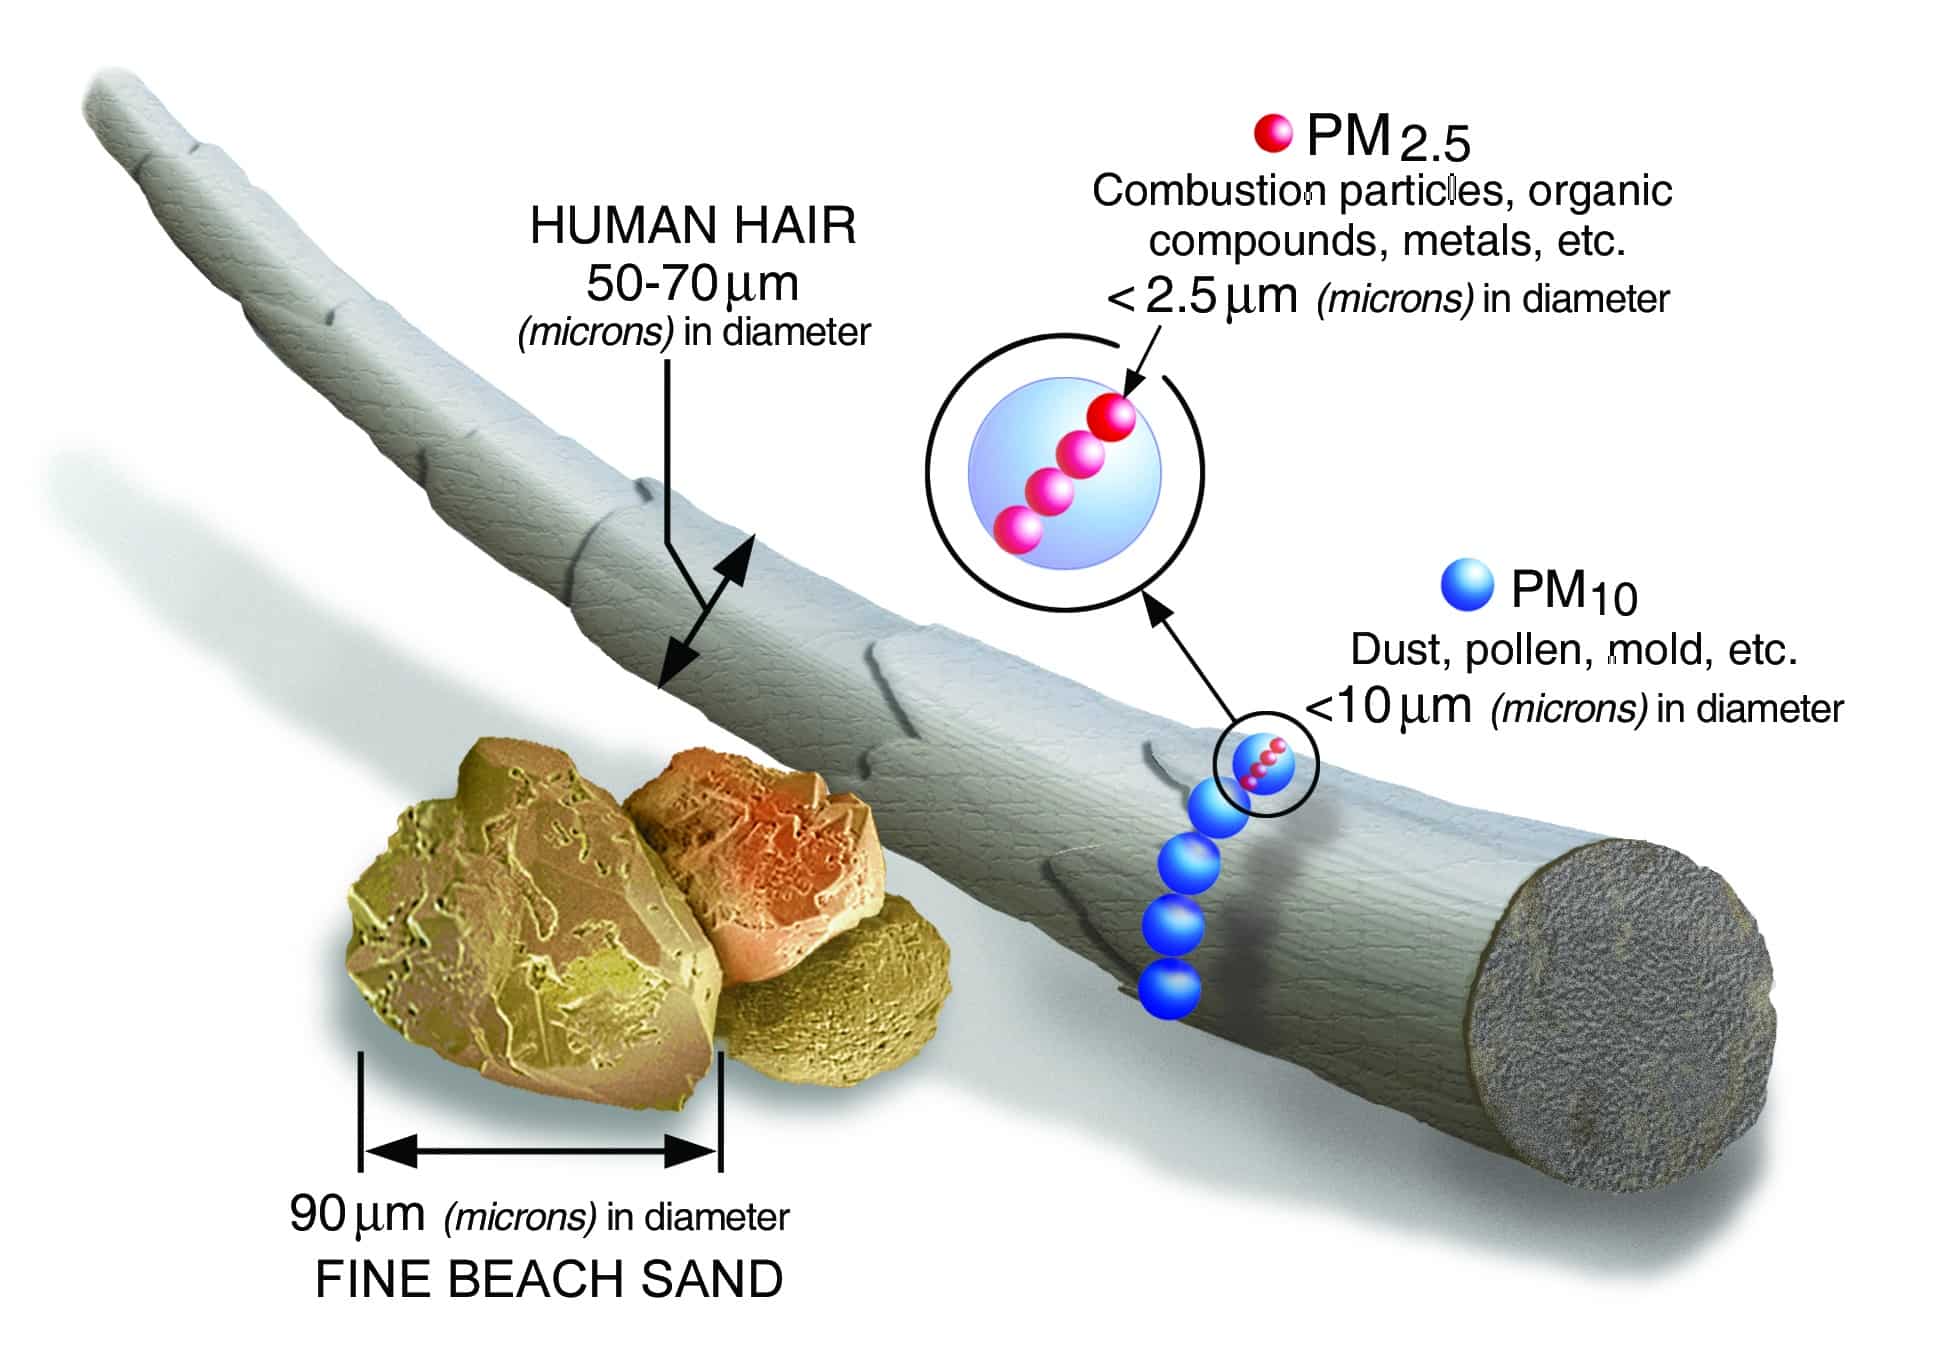 Graphic showing the scale of particulates smaller than human hair or a grain of sand